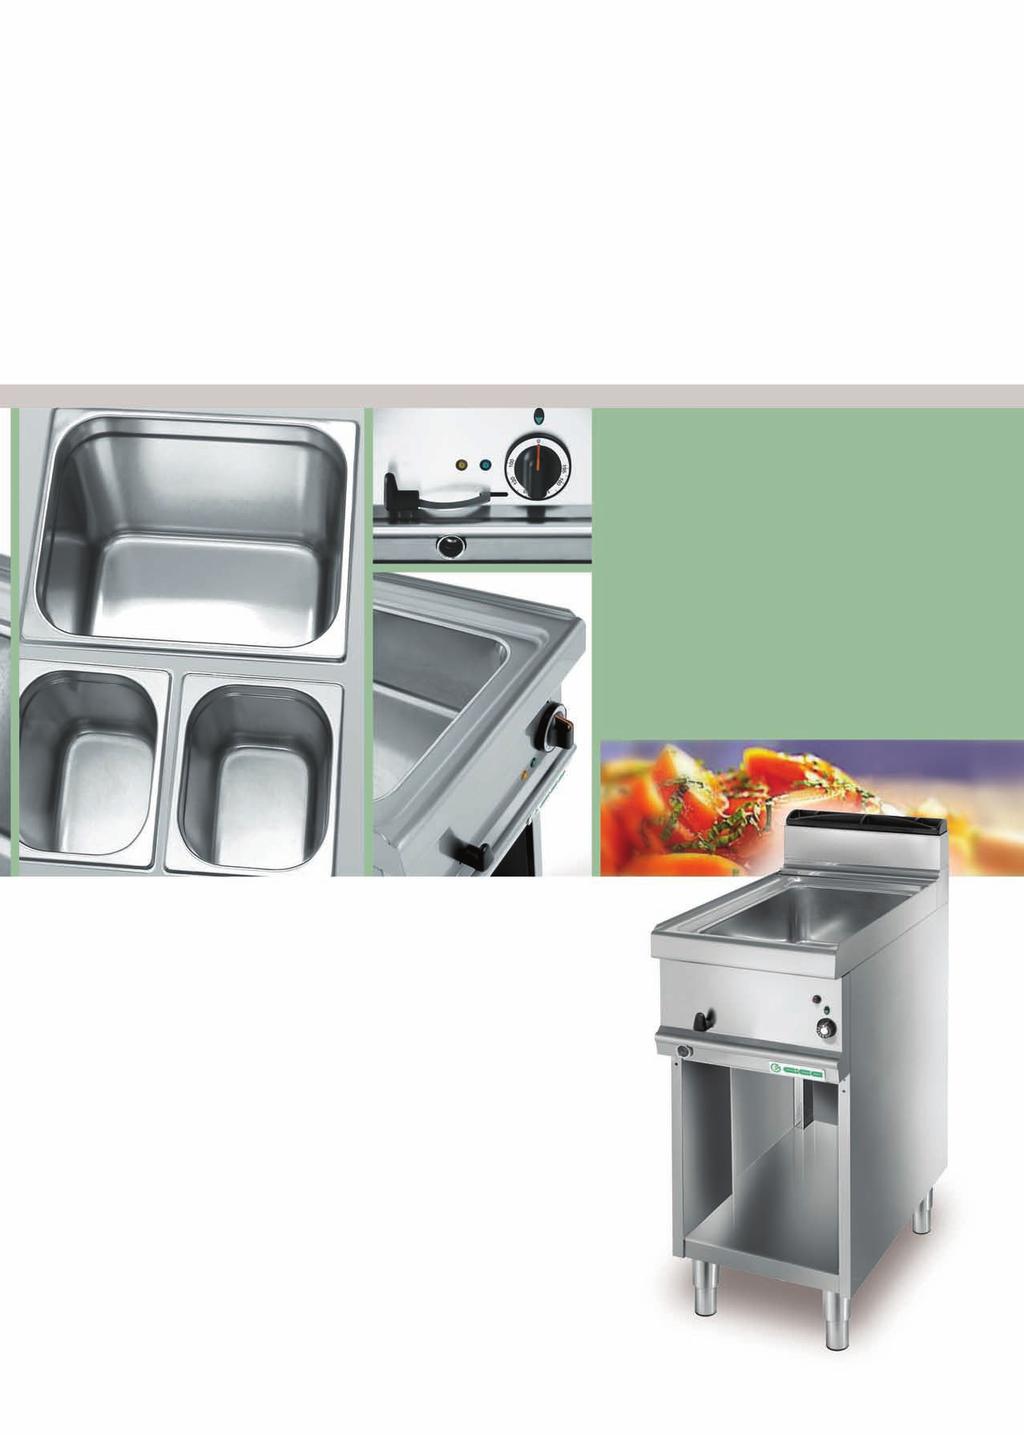 GB The range allows a choice from two electric models and one gas. The tubs in stainless steel 18/10 AISI 304, fully pressed, allow for quick and safe cleaning.